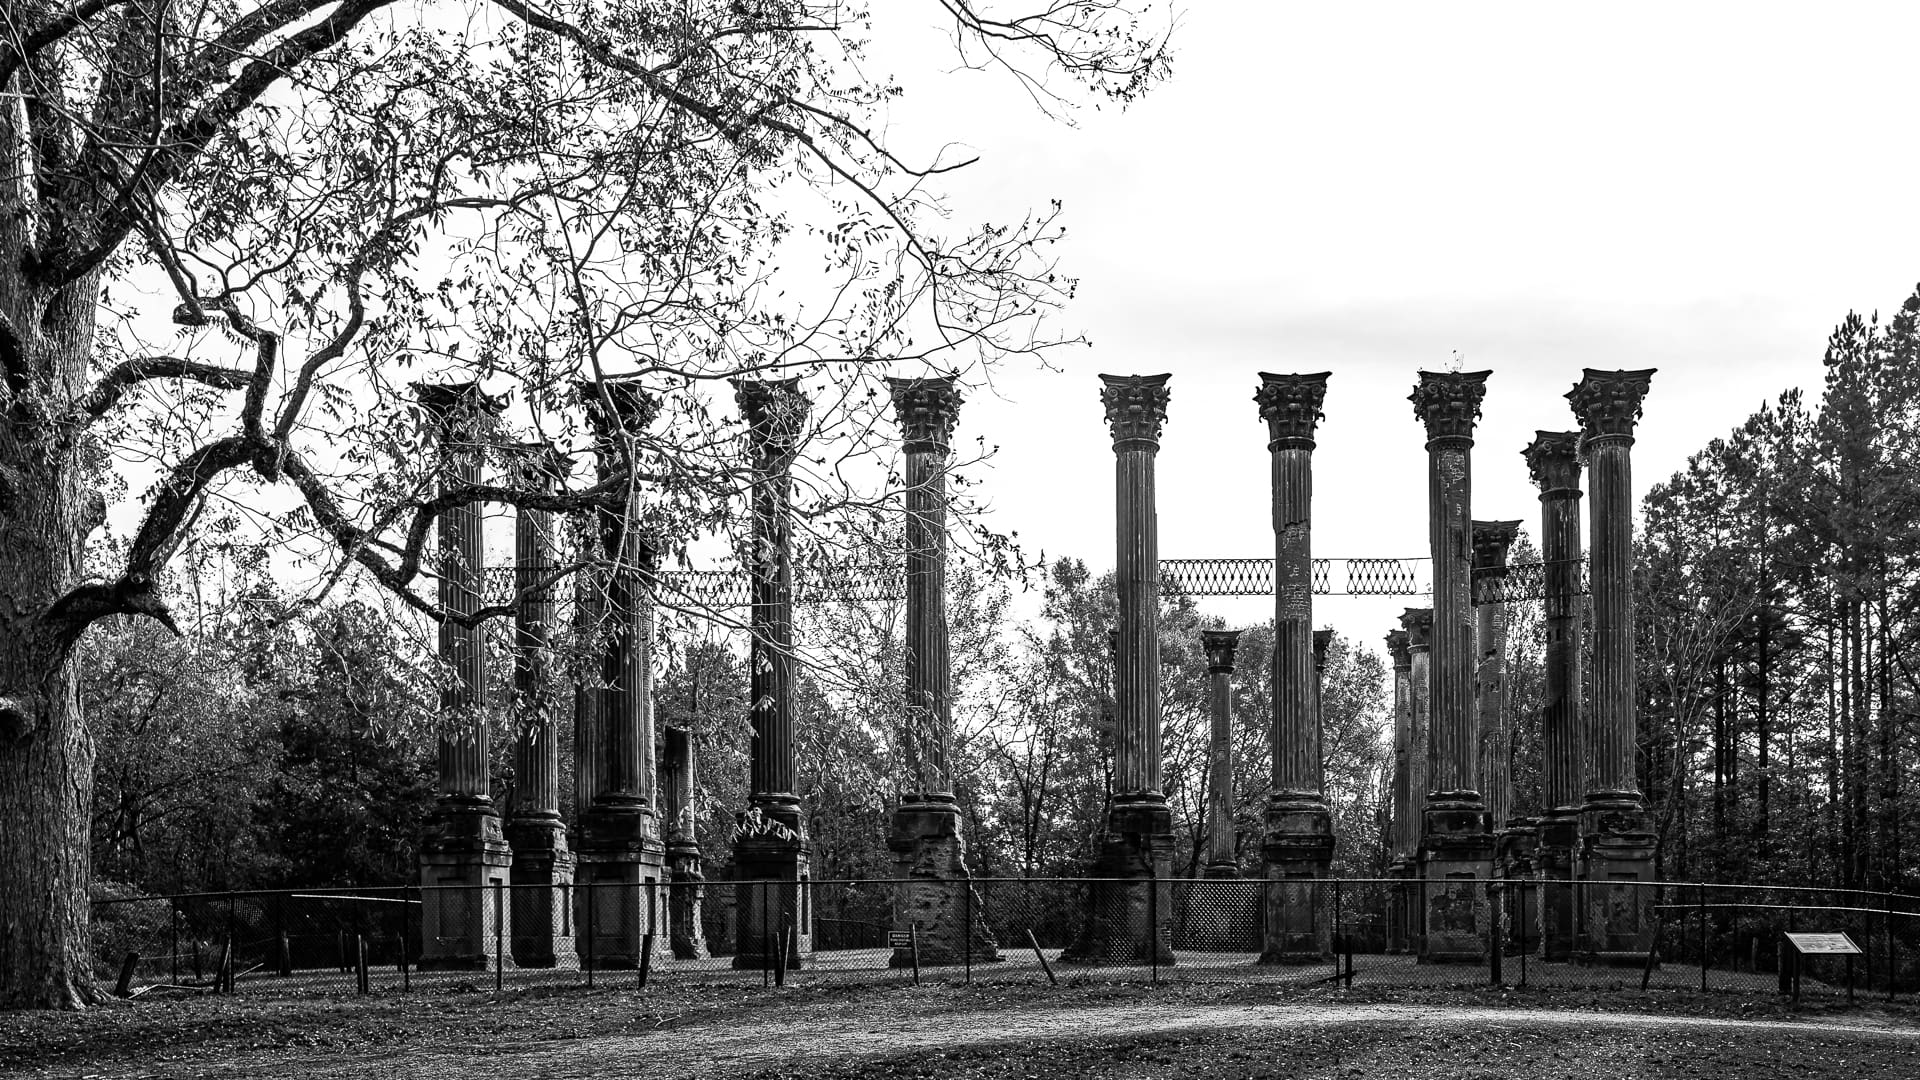 The Windsor Ruins of Port Gibson, Mississippi - Full Architecture Photo